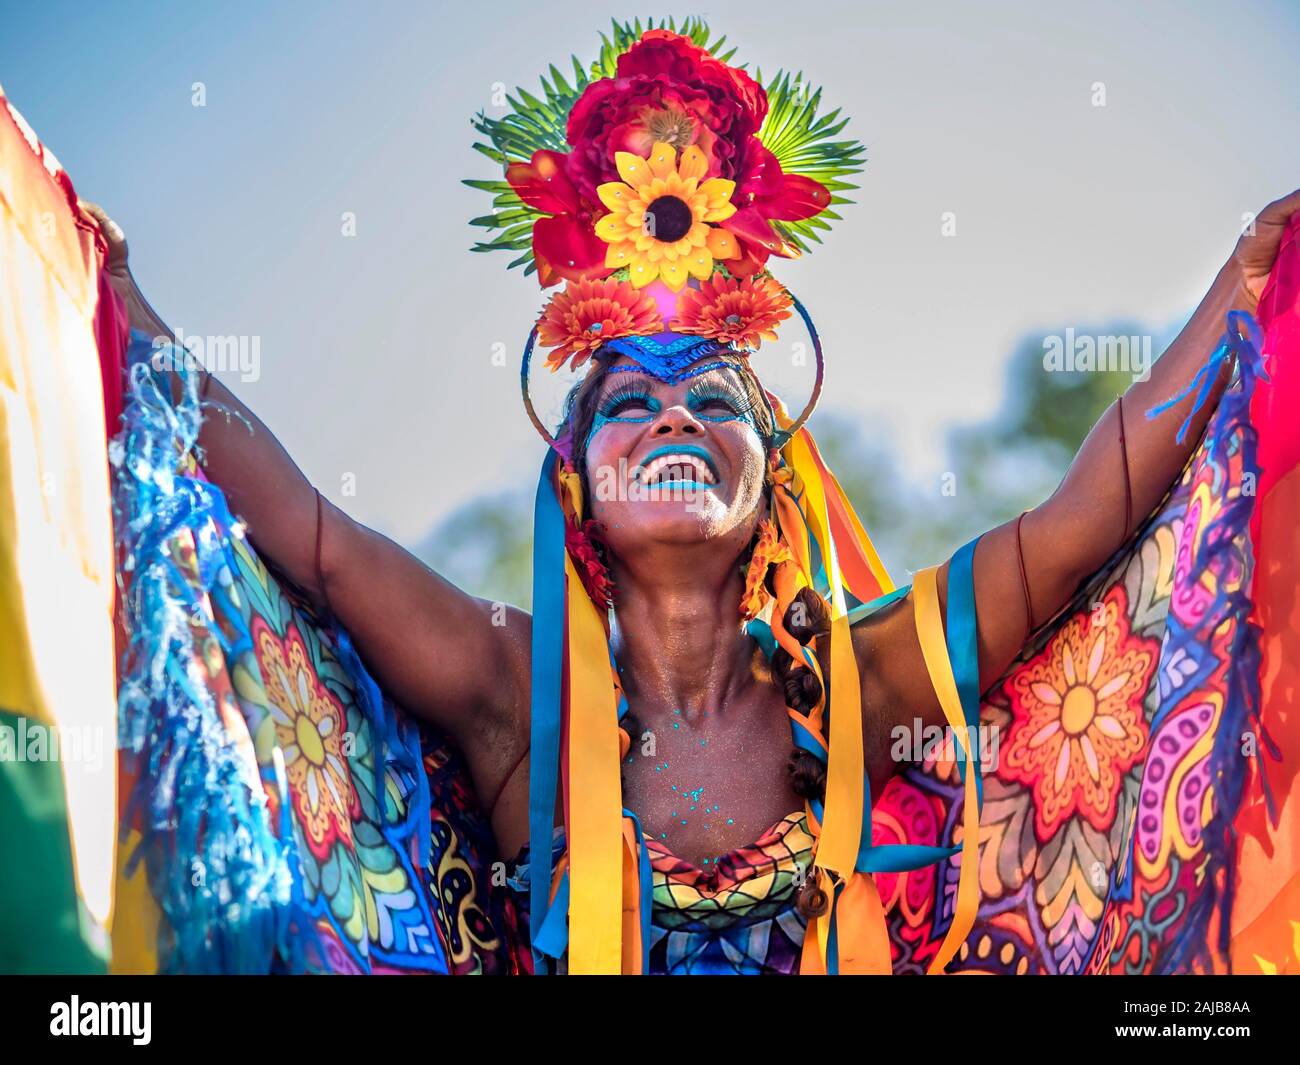 Beautiful Brazilian woman of African descent wearing colourful costumes and smiling during Carnaval street party in Rio de Janeiro, Brazil. Stock Photo